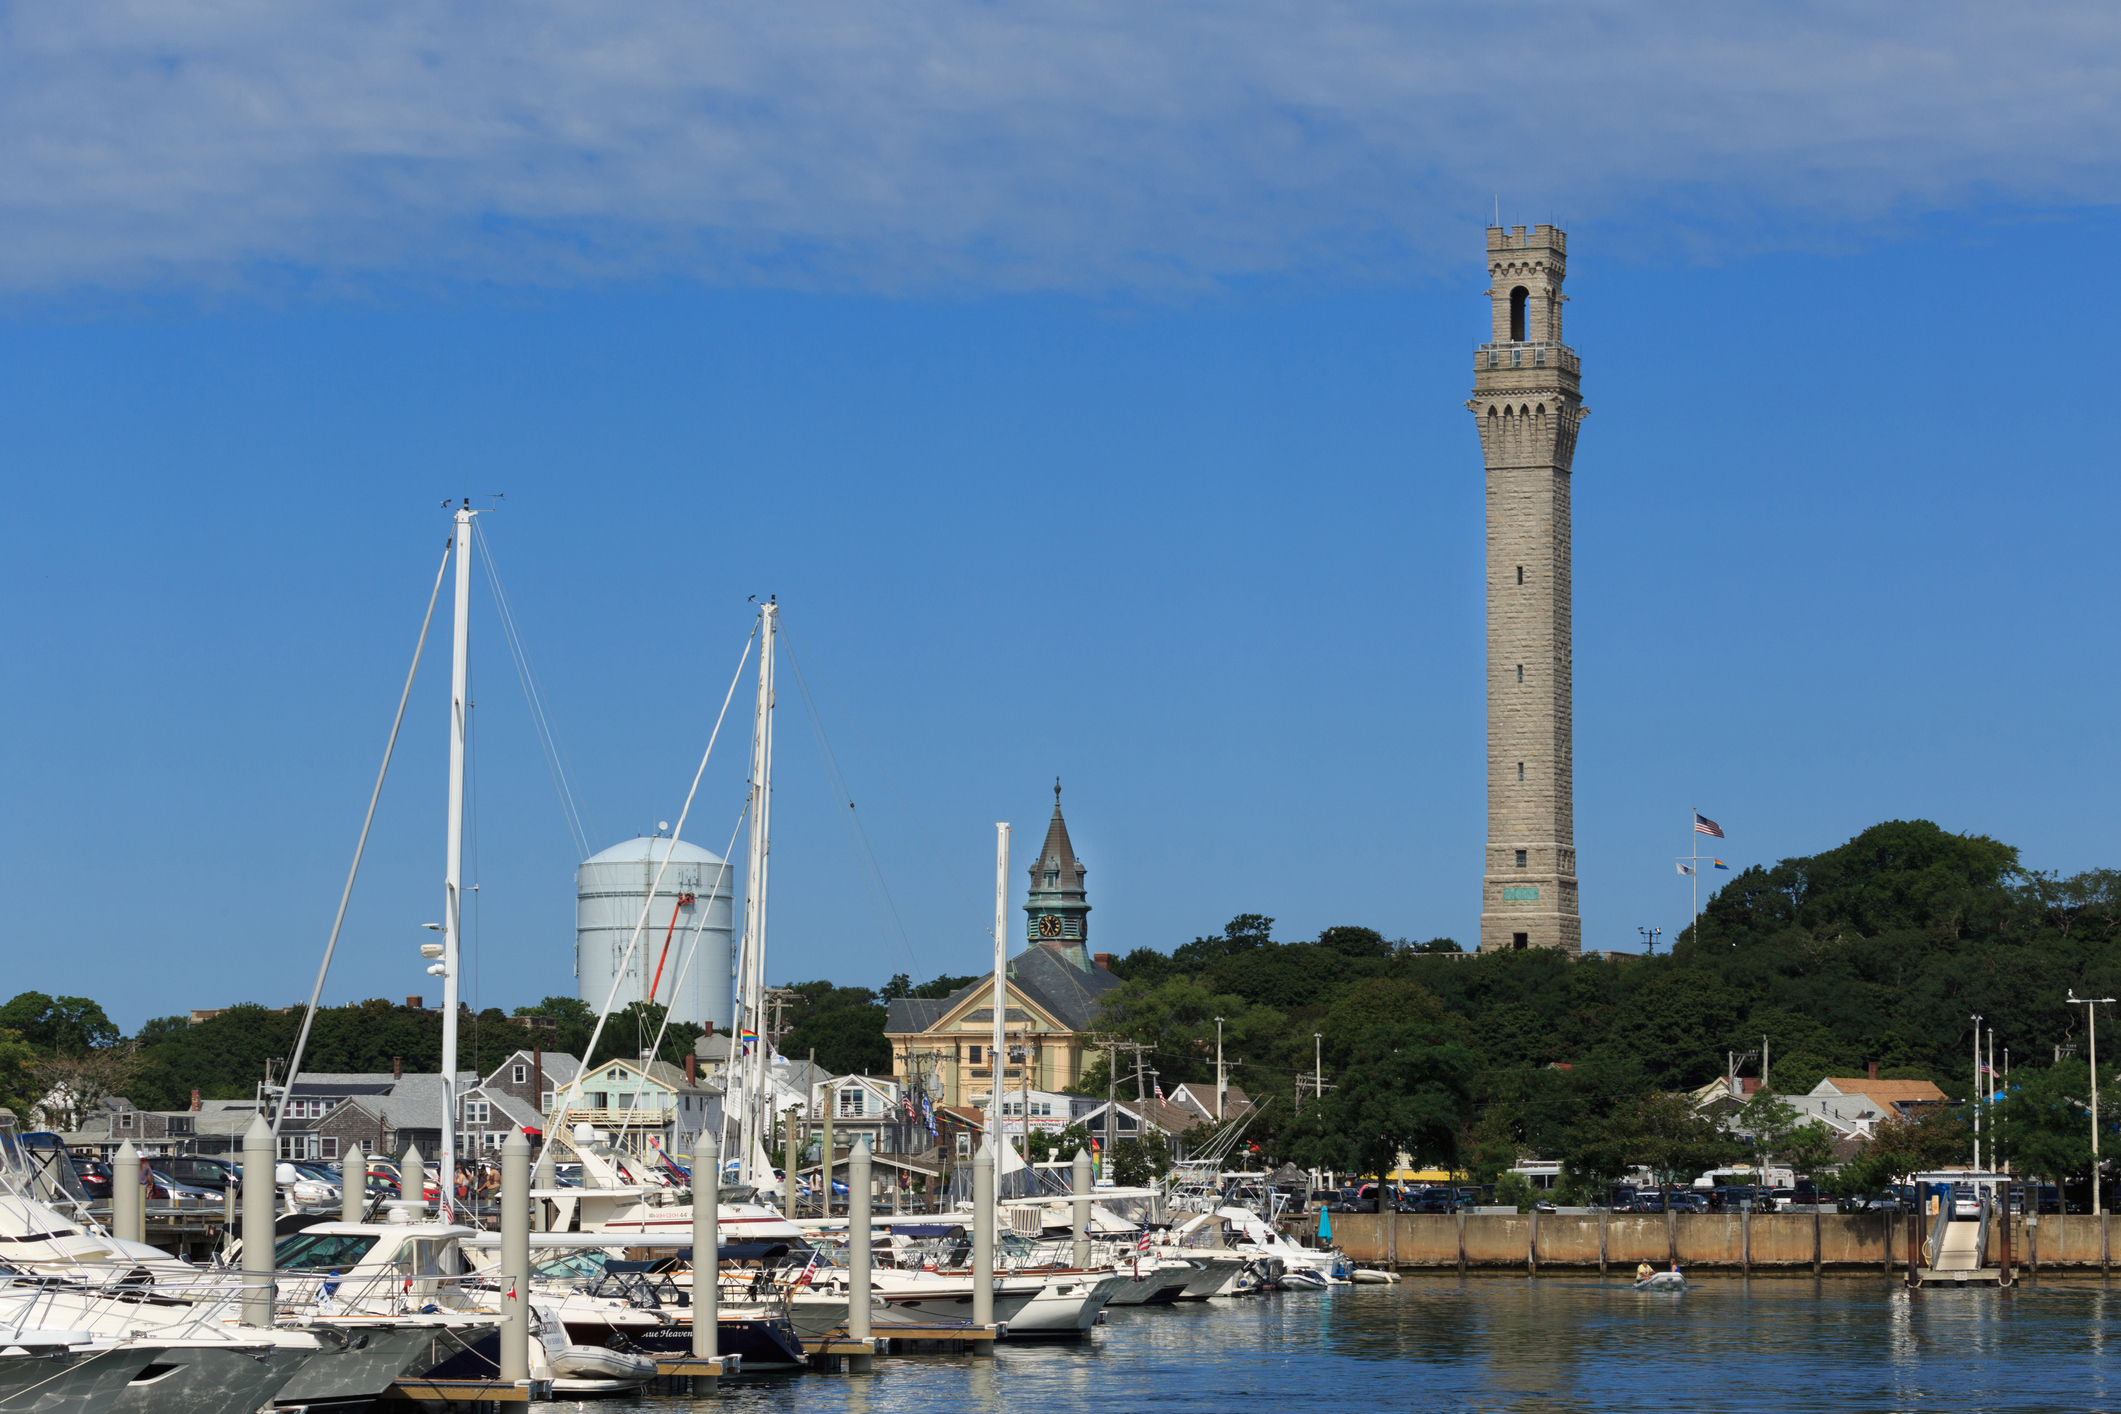 Granite tower overlooks a bay crowded with sailboats.